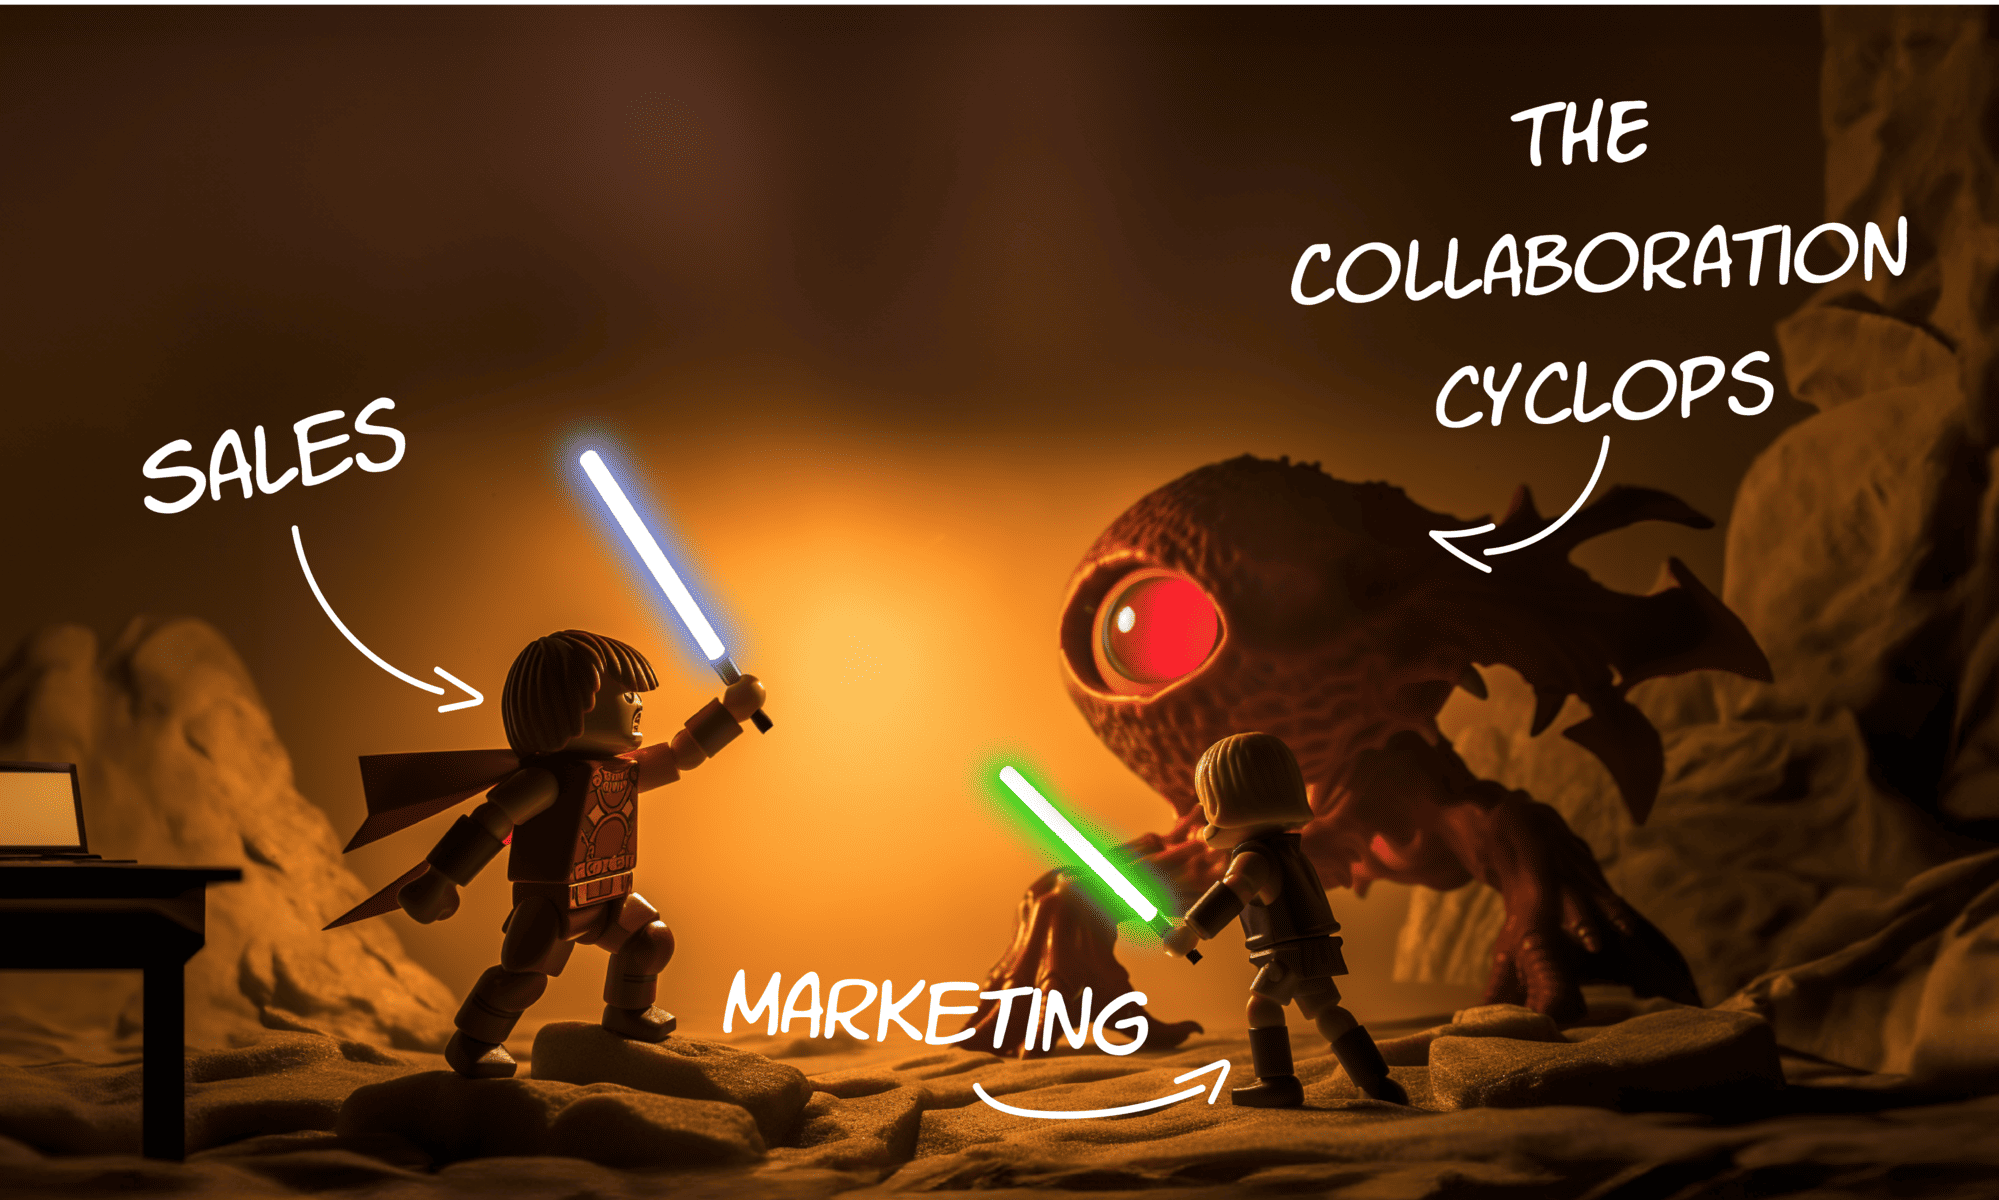 Two Playmobile figures, labelled sales and marketing, with lightsabers fighting a cyclops monster labelled "The Collaboration Cyclops"